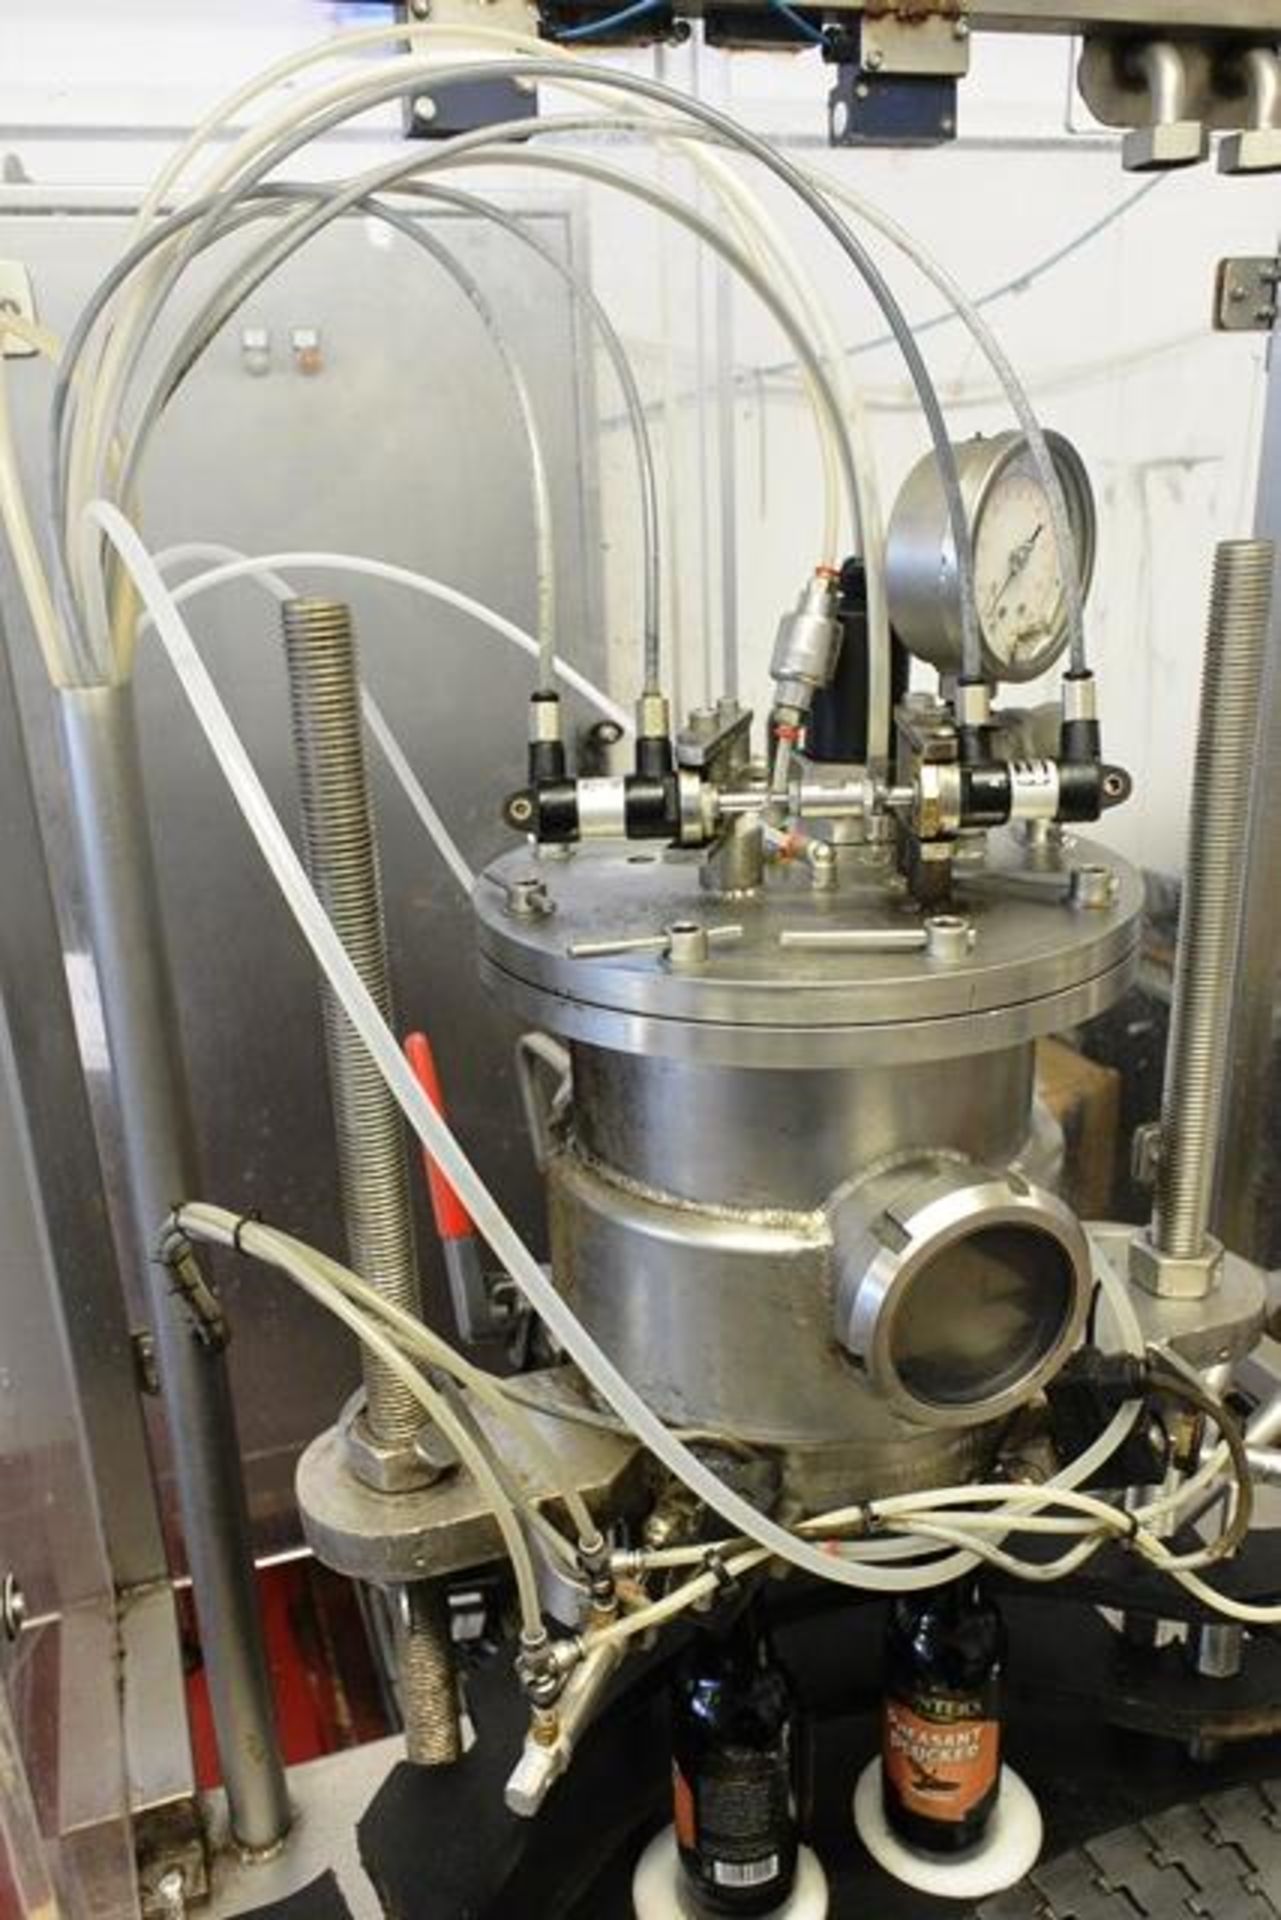 Stainless steel twin bottle carousel filling machine, capacity circa 300 bottles/hr, with perspex - Image 5 of 9